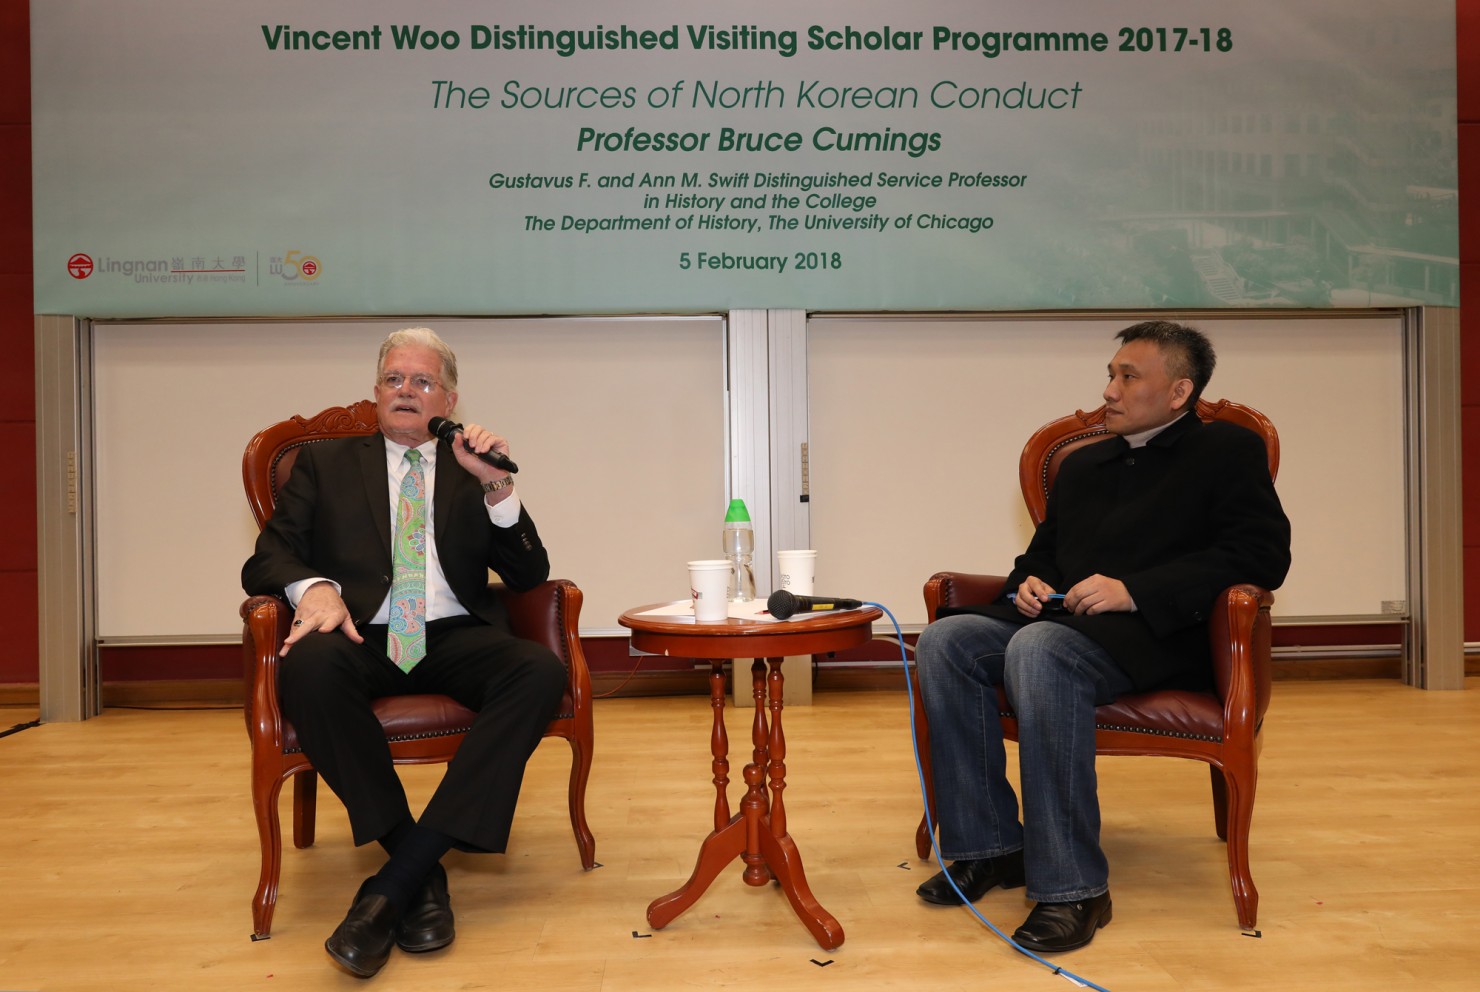 Public lecture of Vincent Woo Distinguished Visiting Scholar Programme on “The Sources of North Korean Conduct”